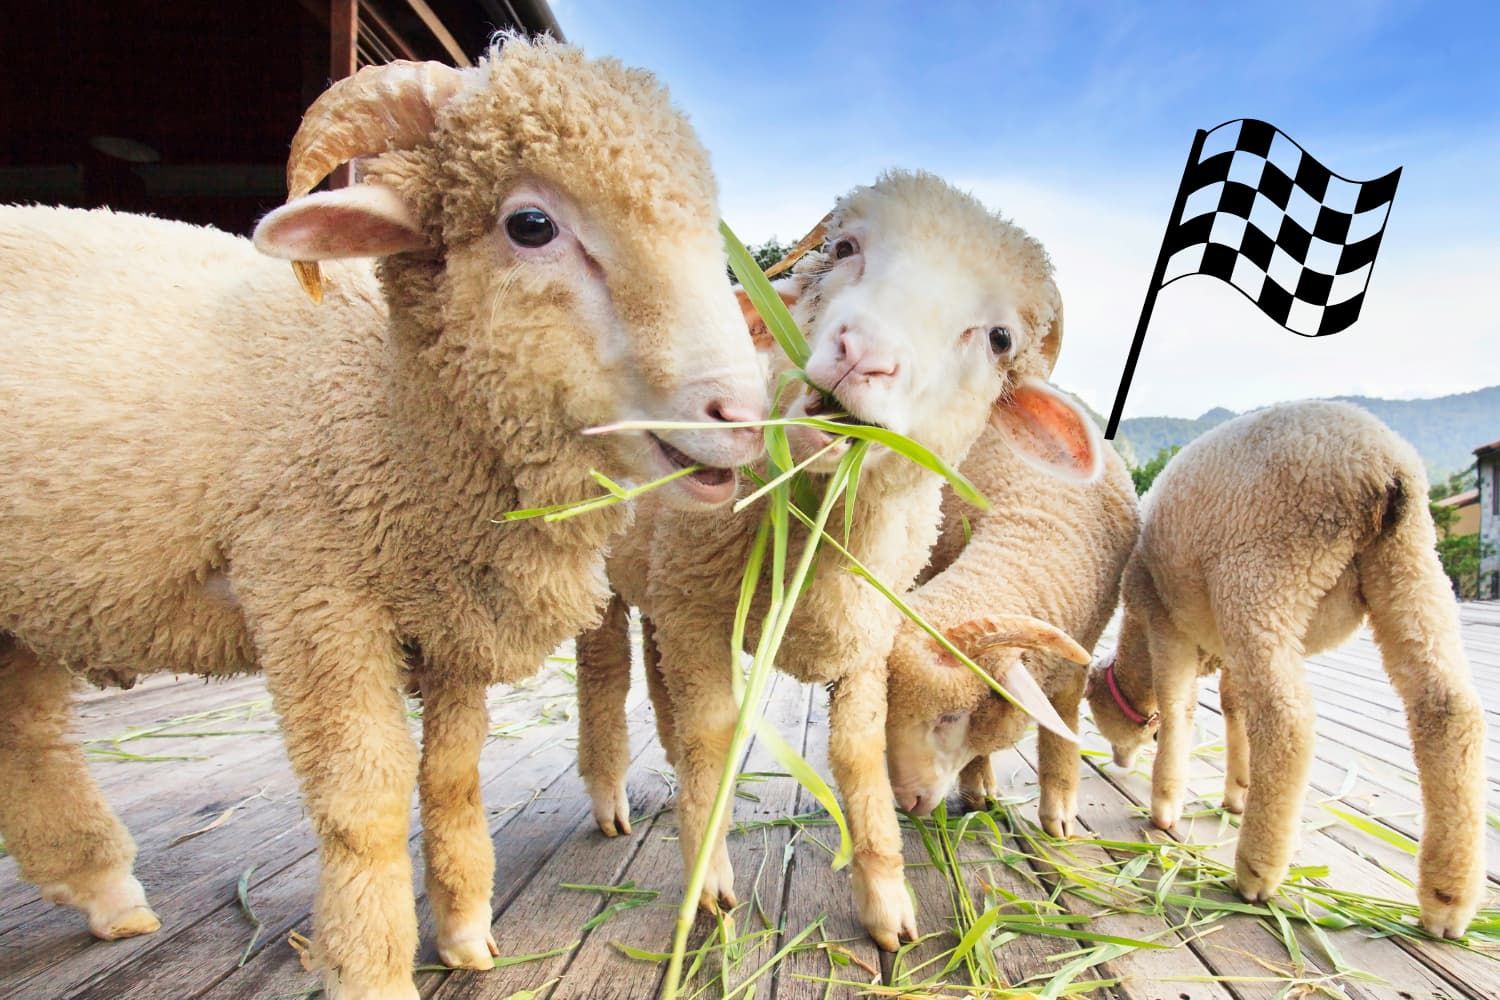 Game%20-%20OT%20Psalm%2023%20-%20The%20feed%20the%20sheep%20relay%20race-6bb58723 Safety / security